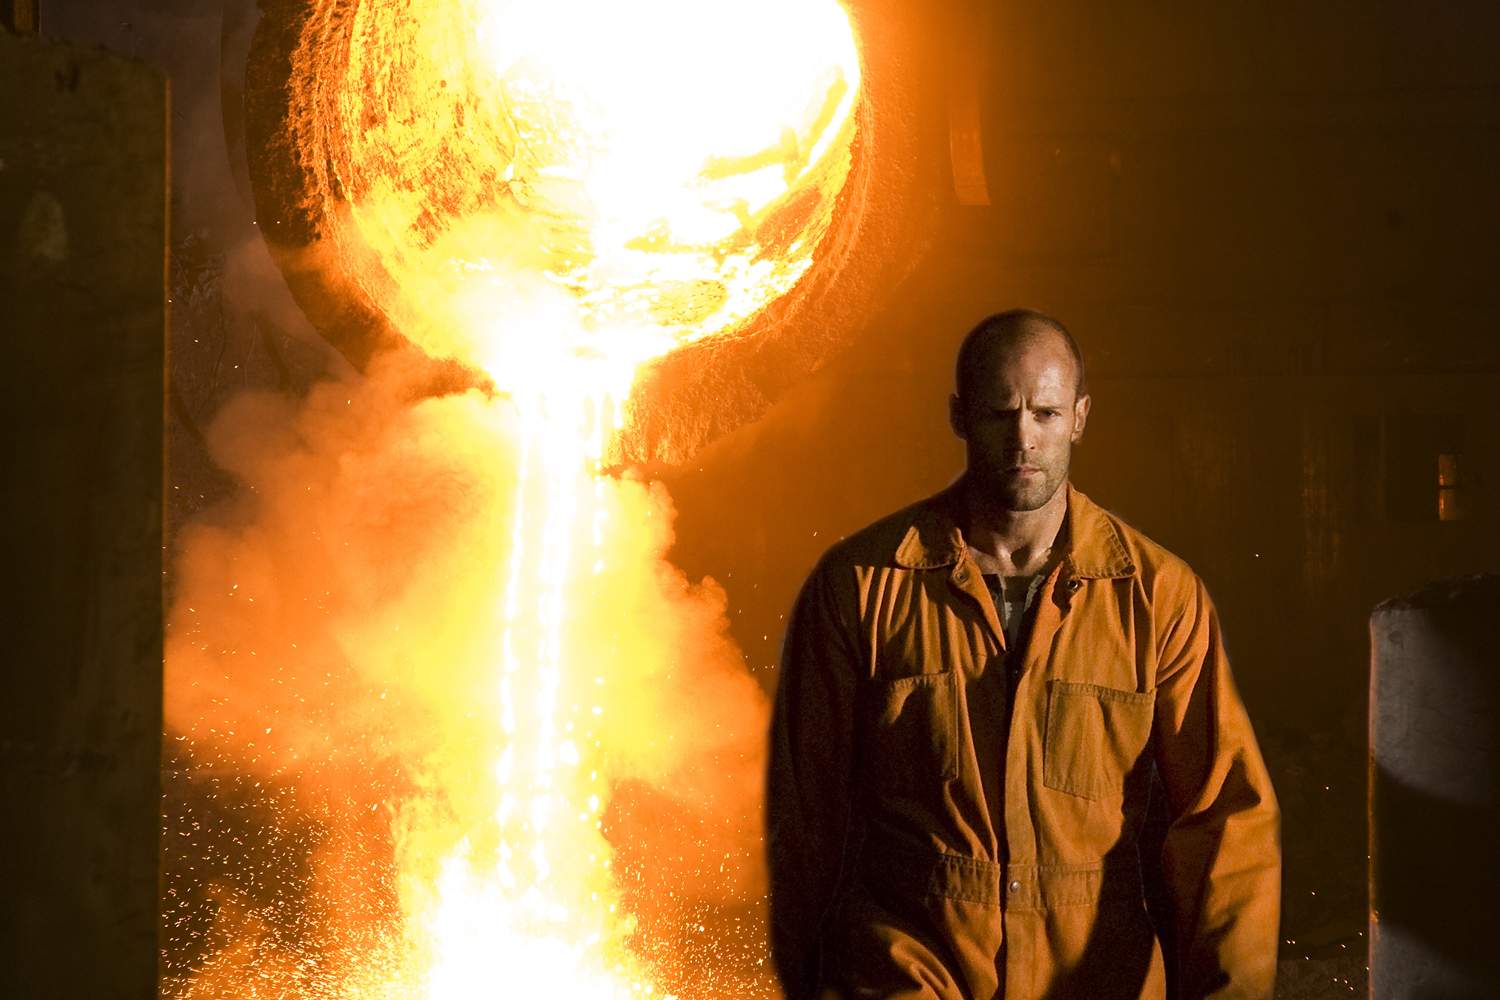 JASON STATHAM stars as Jensen Ames in an action-thriller set in the post-industrial wasteland of tomorrow, with the world's most brutal sporting event as its backdrop - Death Race. Photo Credit: Takashi Seida.